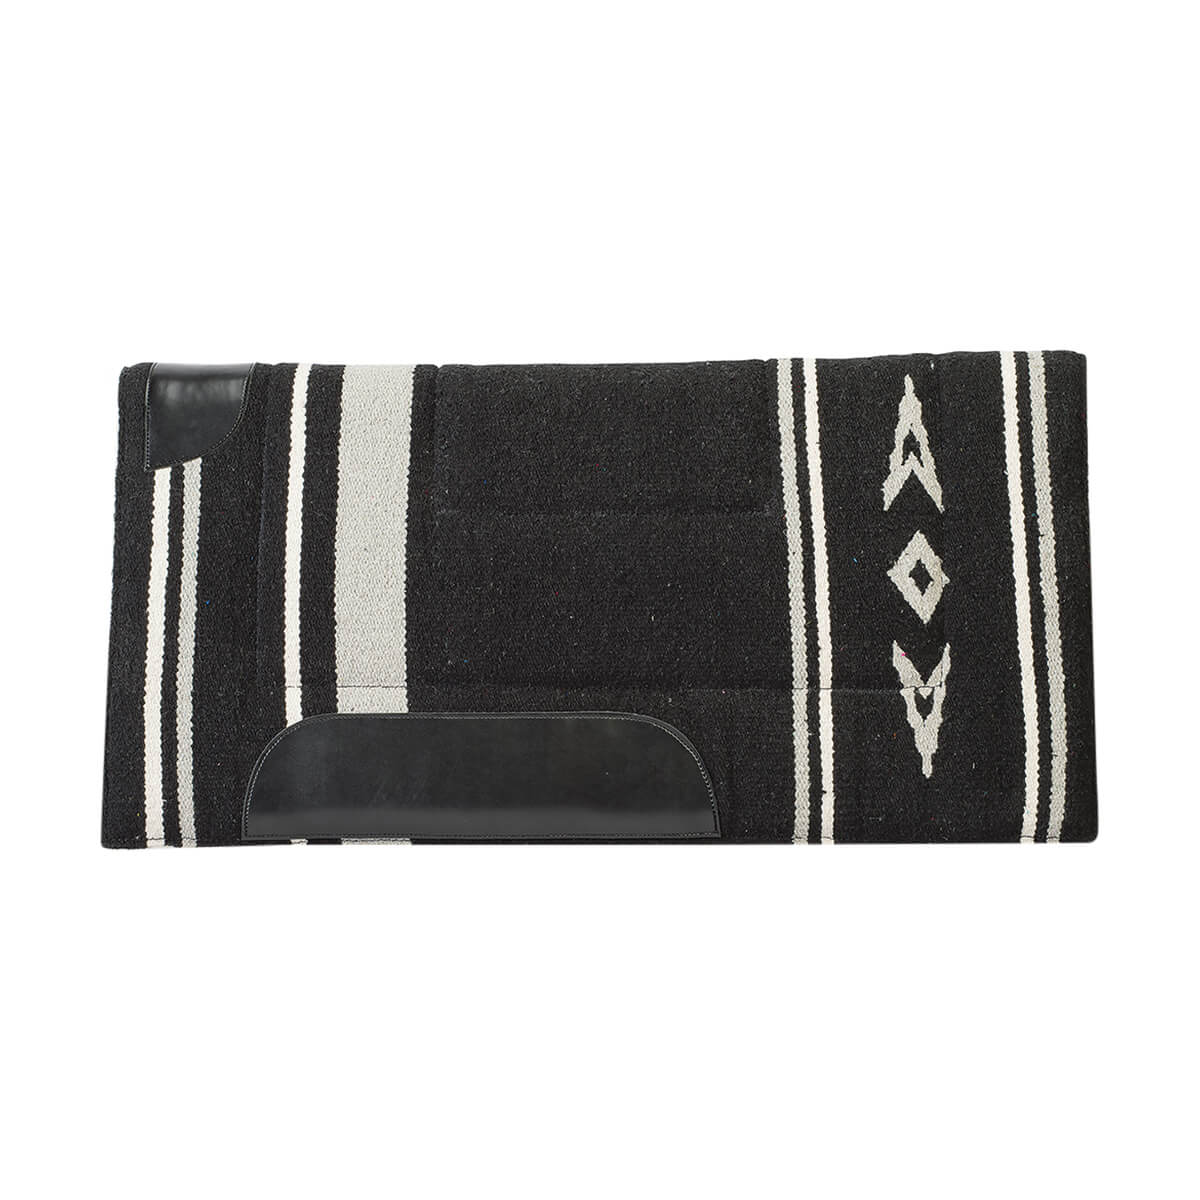 Fleece Lined Acrylic Saddle Pad - Black/Gray - 32-in x 32-in